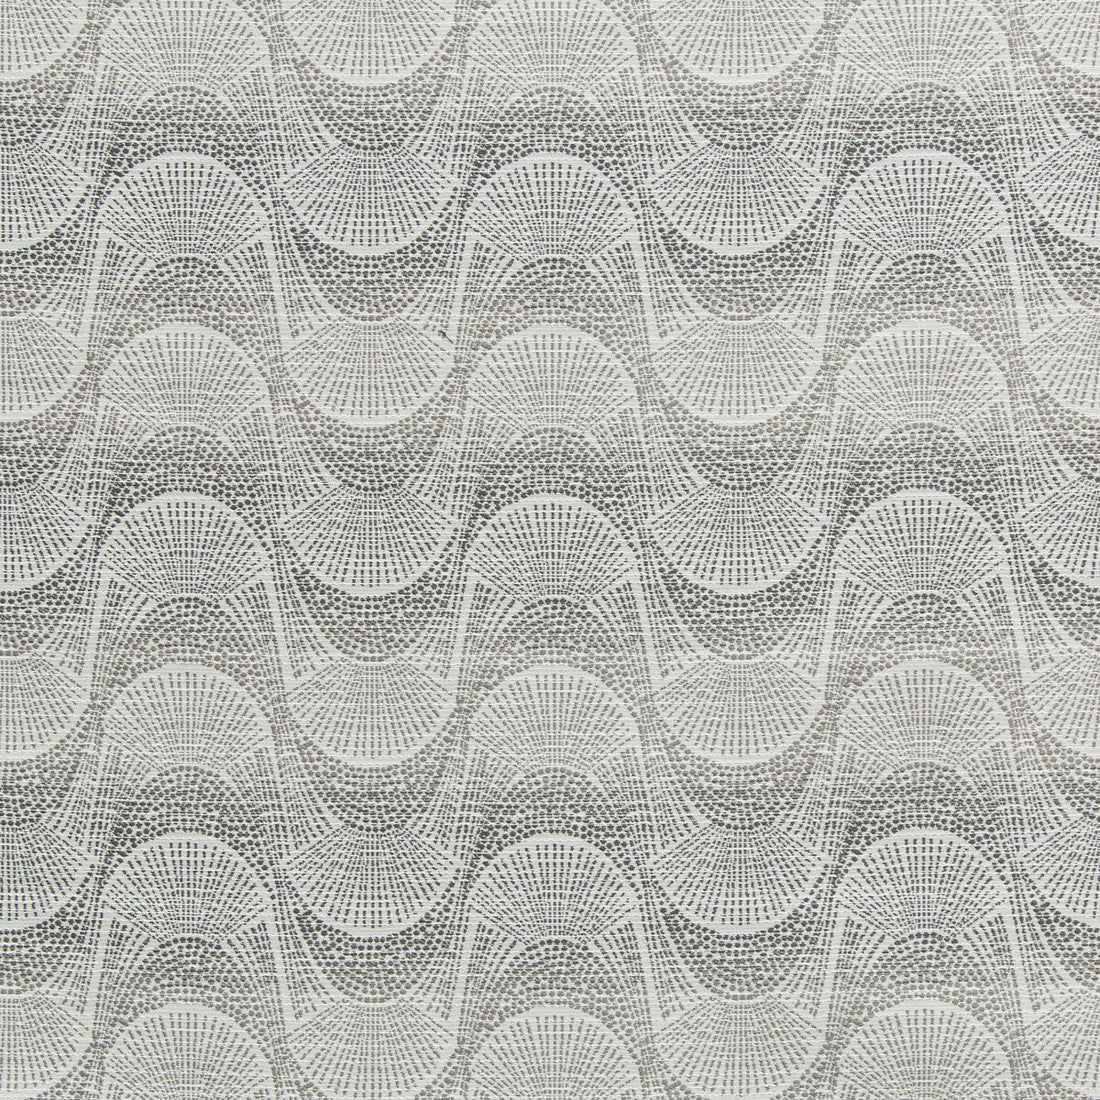 Tofino fabric in stone color - pattern 35835.11.0 - by Kravet Design in the Indoor / Outdoor collection